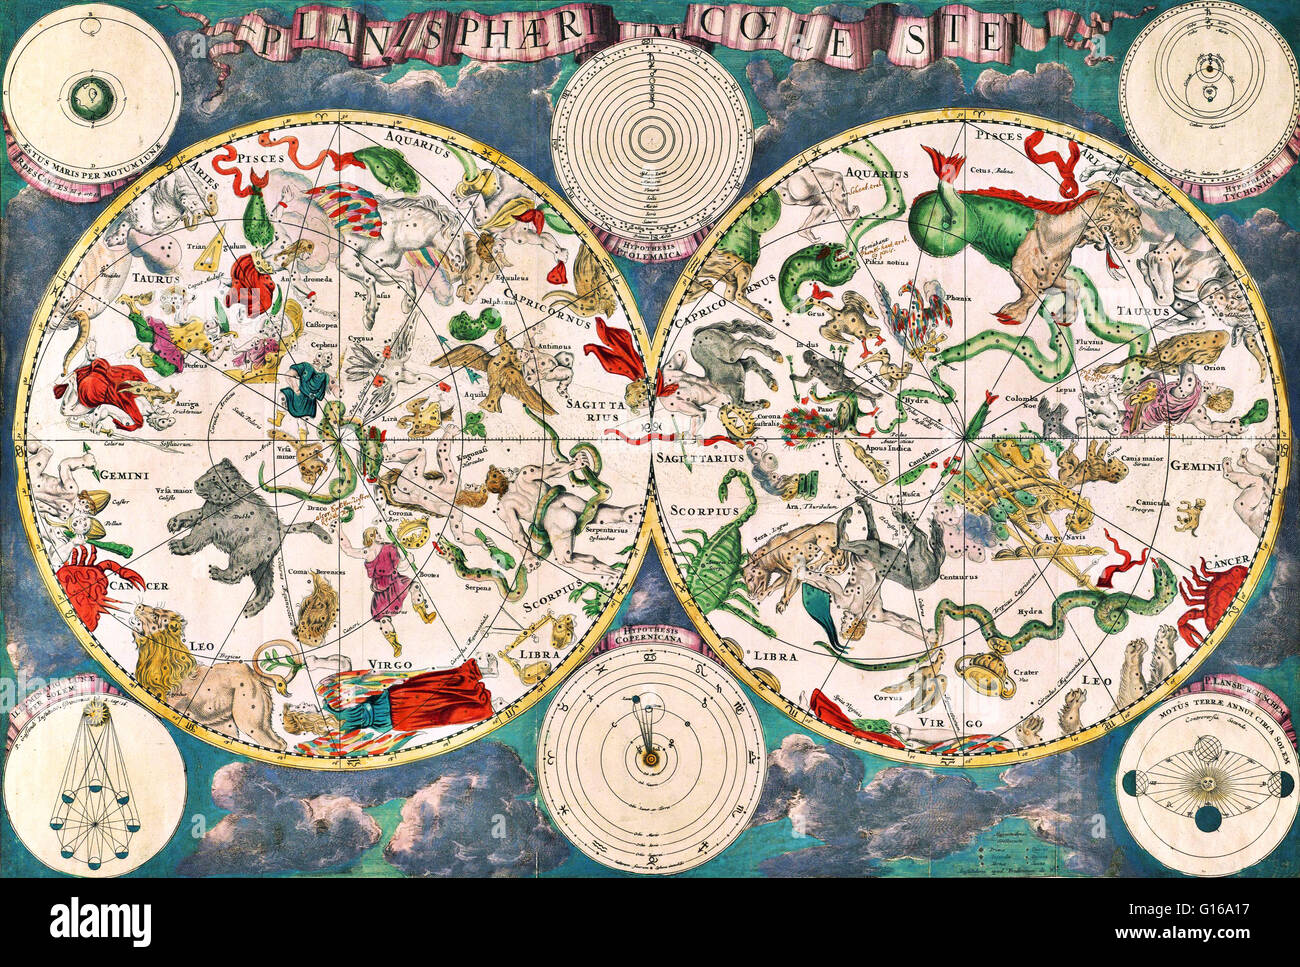 Planisphaeri coeleste, 1680, a celestial planisphere featuring the constellations of the northern and southern hemispheres with traditional representations of the signs of the Zodiac and constellations, including Draco, Serpens and Hydra. Astronomy and ce Stock Photo